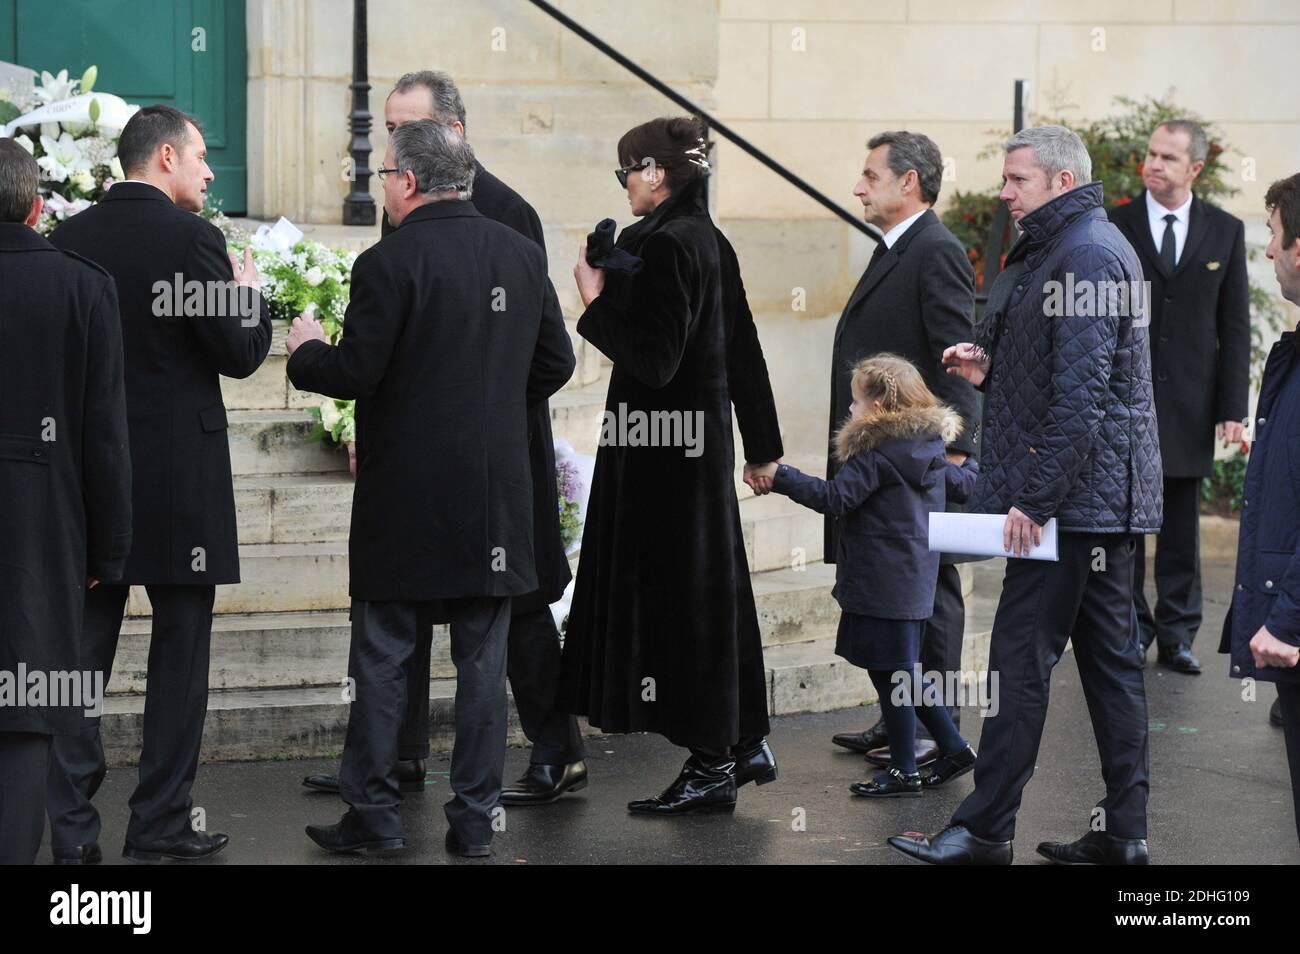 Nicolas Sarkozy, his wife Carla Bruni-Sarkozy and their daughter Giulia attending the funeral of Andree Sarkozy aka Dadue, mother of Former French President Nicolas Sarkozy, at Saint-Jean-Baptiste church in Neuilly-Sur-Seine, France on December 18, 2017. Photo by ABACAPRESS.COM Stock Photo